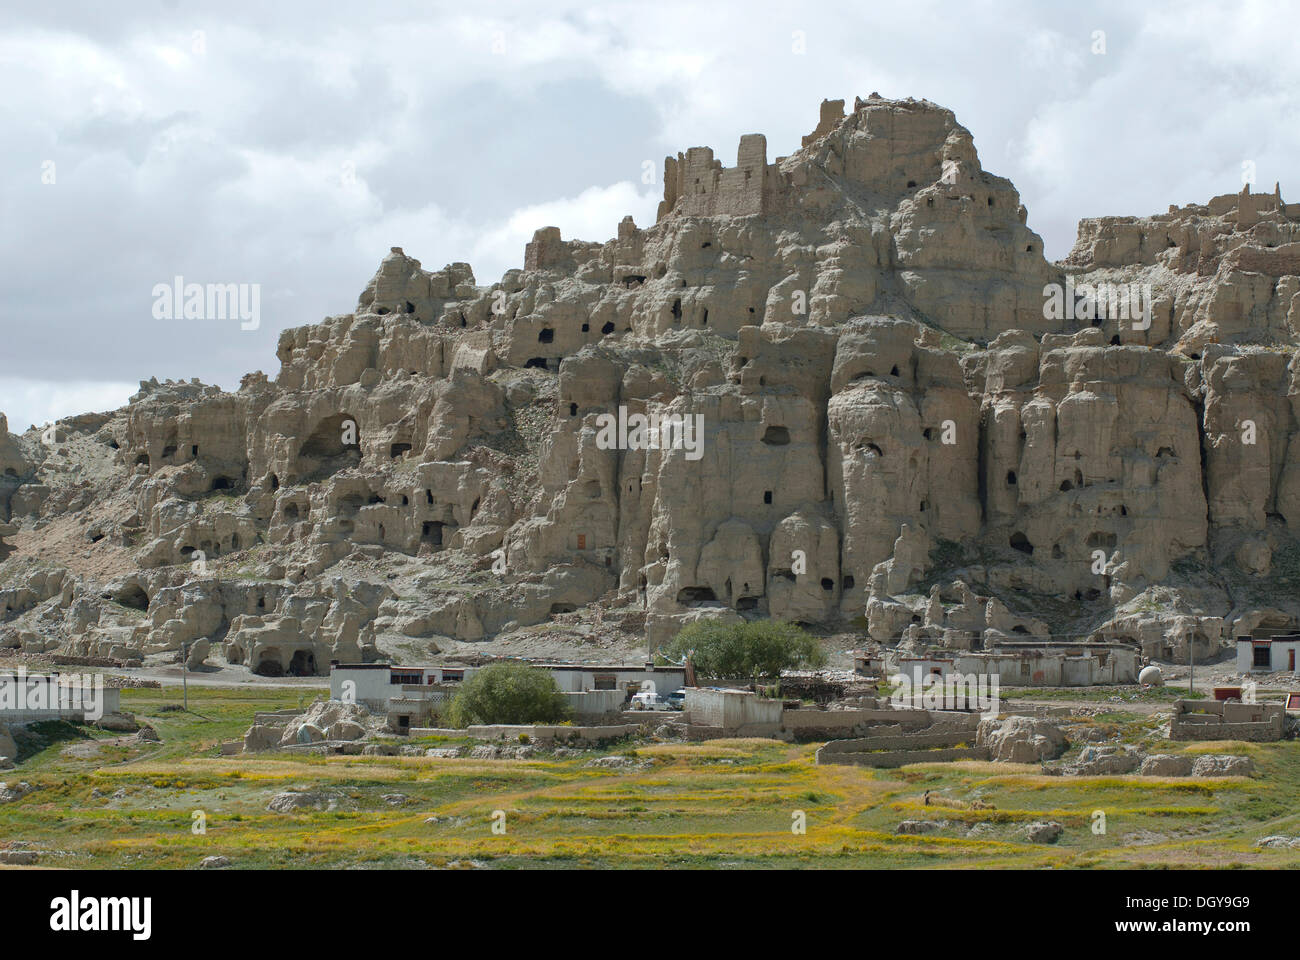 Dungkar caves with Tibetan village at front built in the traditional architectural style of the Tibetans in the ancient Kingdom Stock Photo